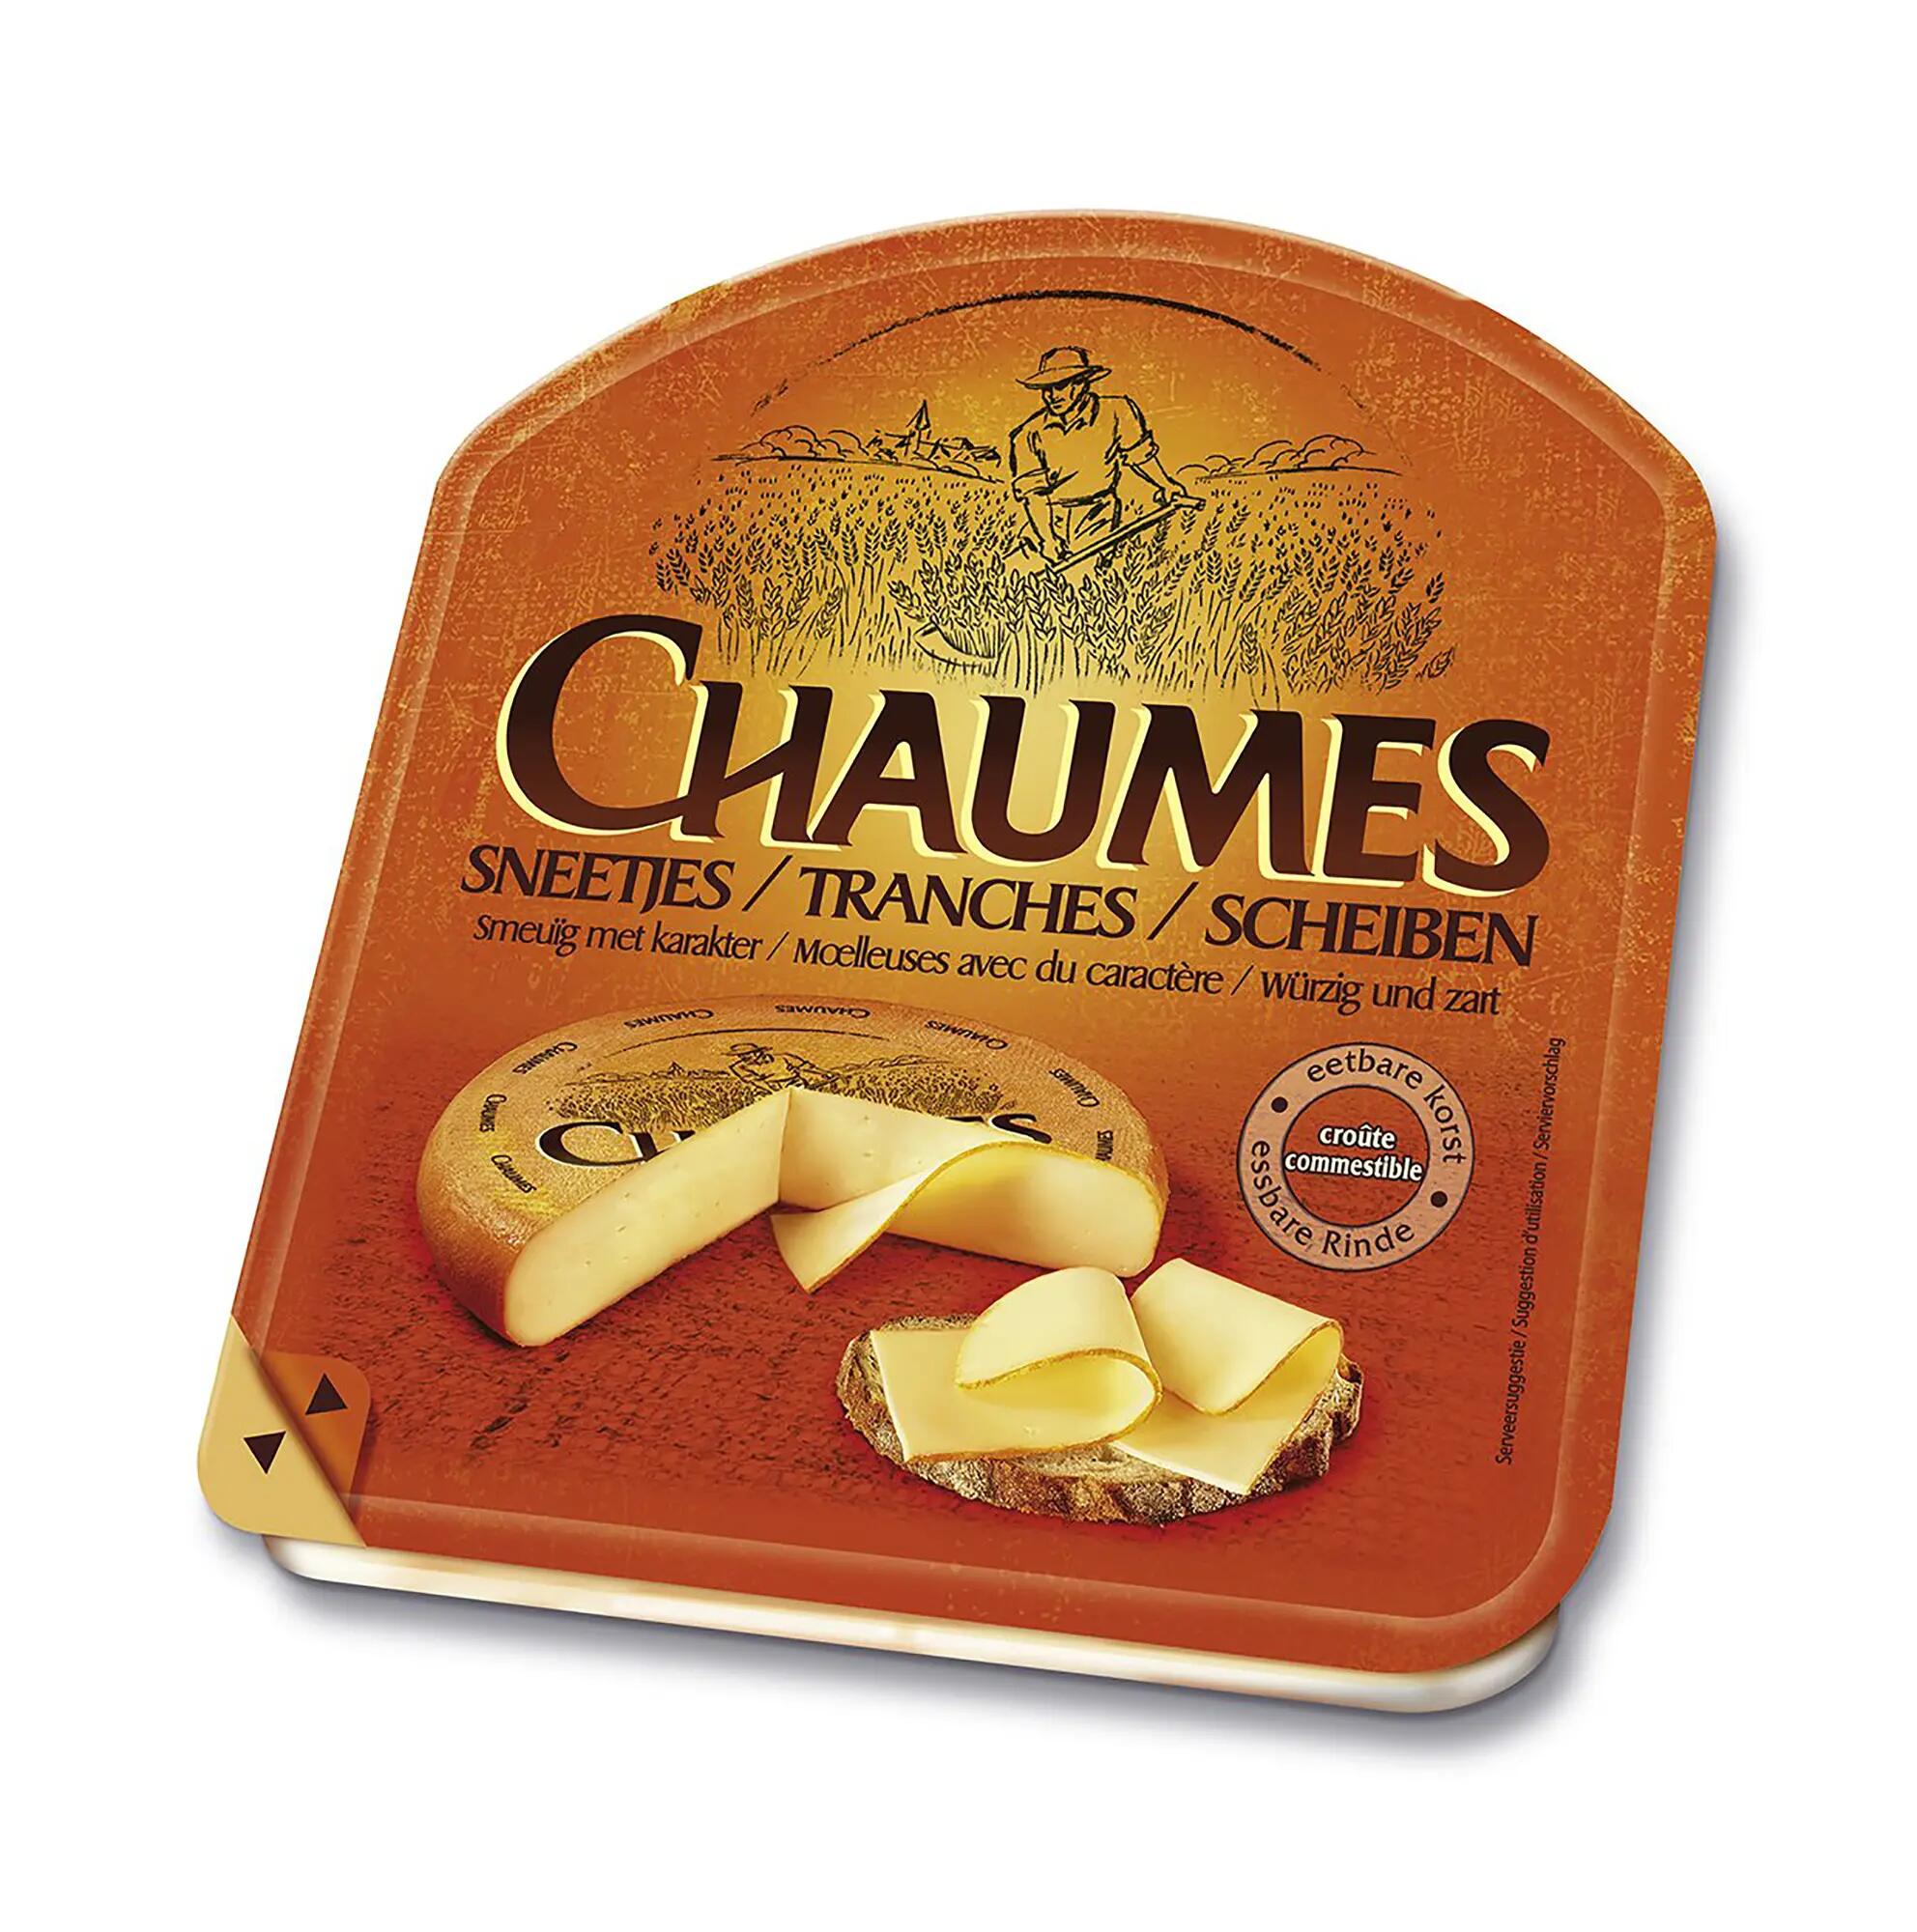 CHAUMES TRANCHES 150G